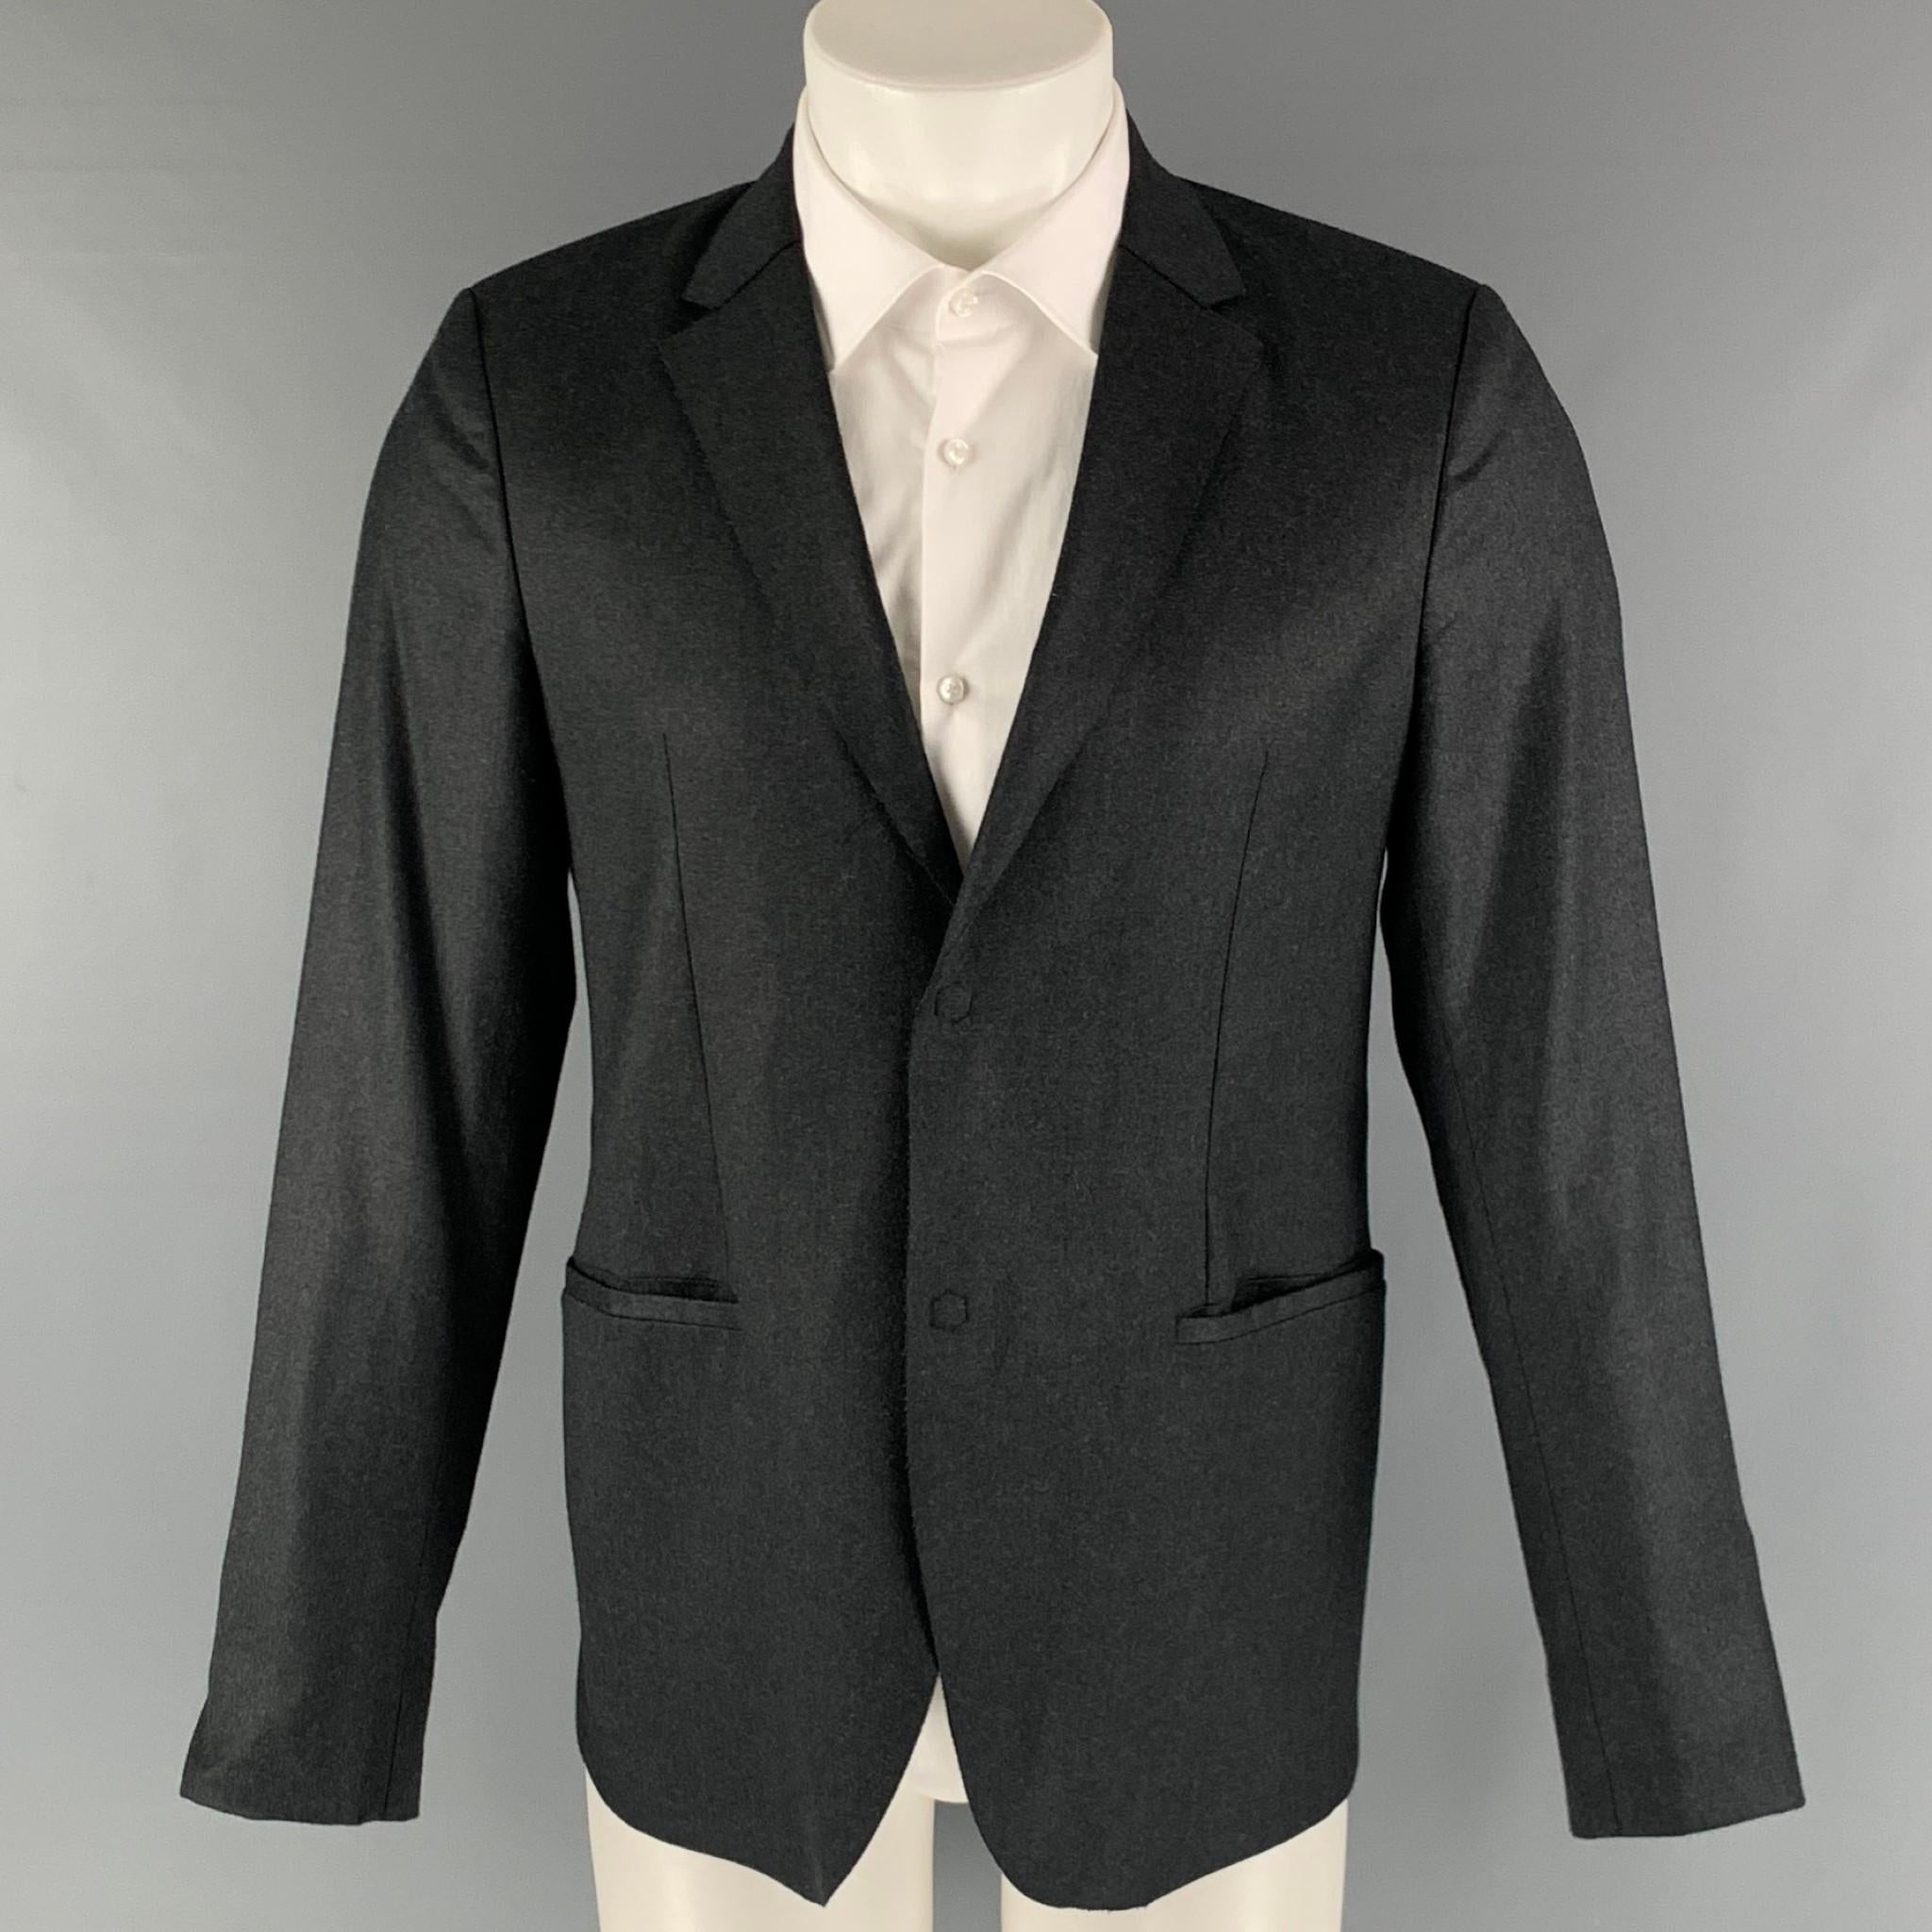 EMPORIO ARMANI 'MILANO' sport coat comes in a charcoal wool woven material with a full liner featuring a notch lapel, welt pockets, and a two snap button closure. Made in Italy.

Excellent Pre-Owned Condition.
Marked: 48

Measurements:

Shoulder: